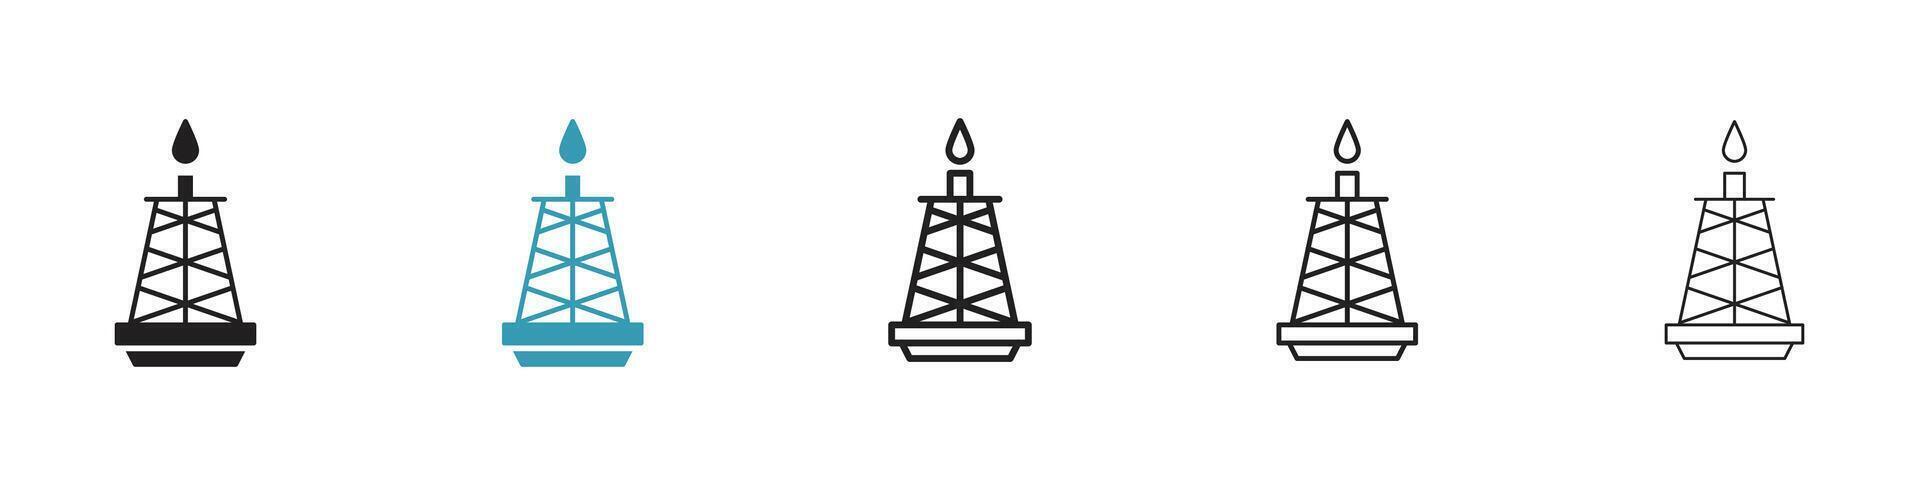 Shale gas rig icon vector